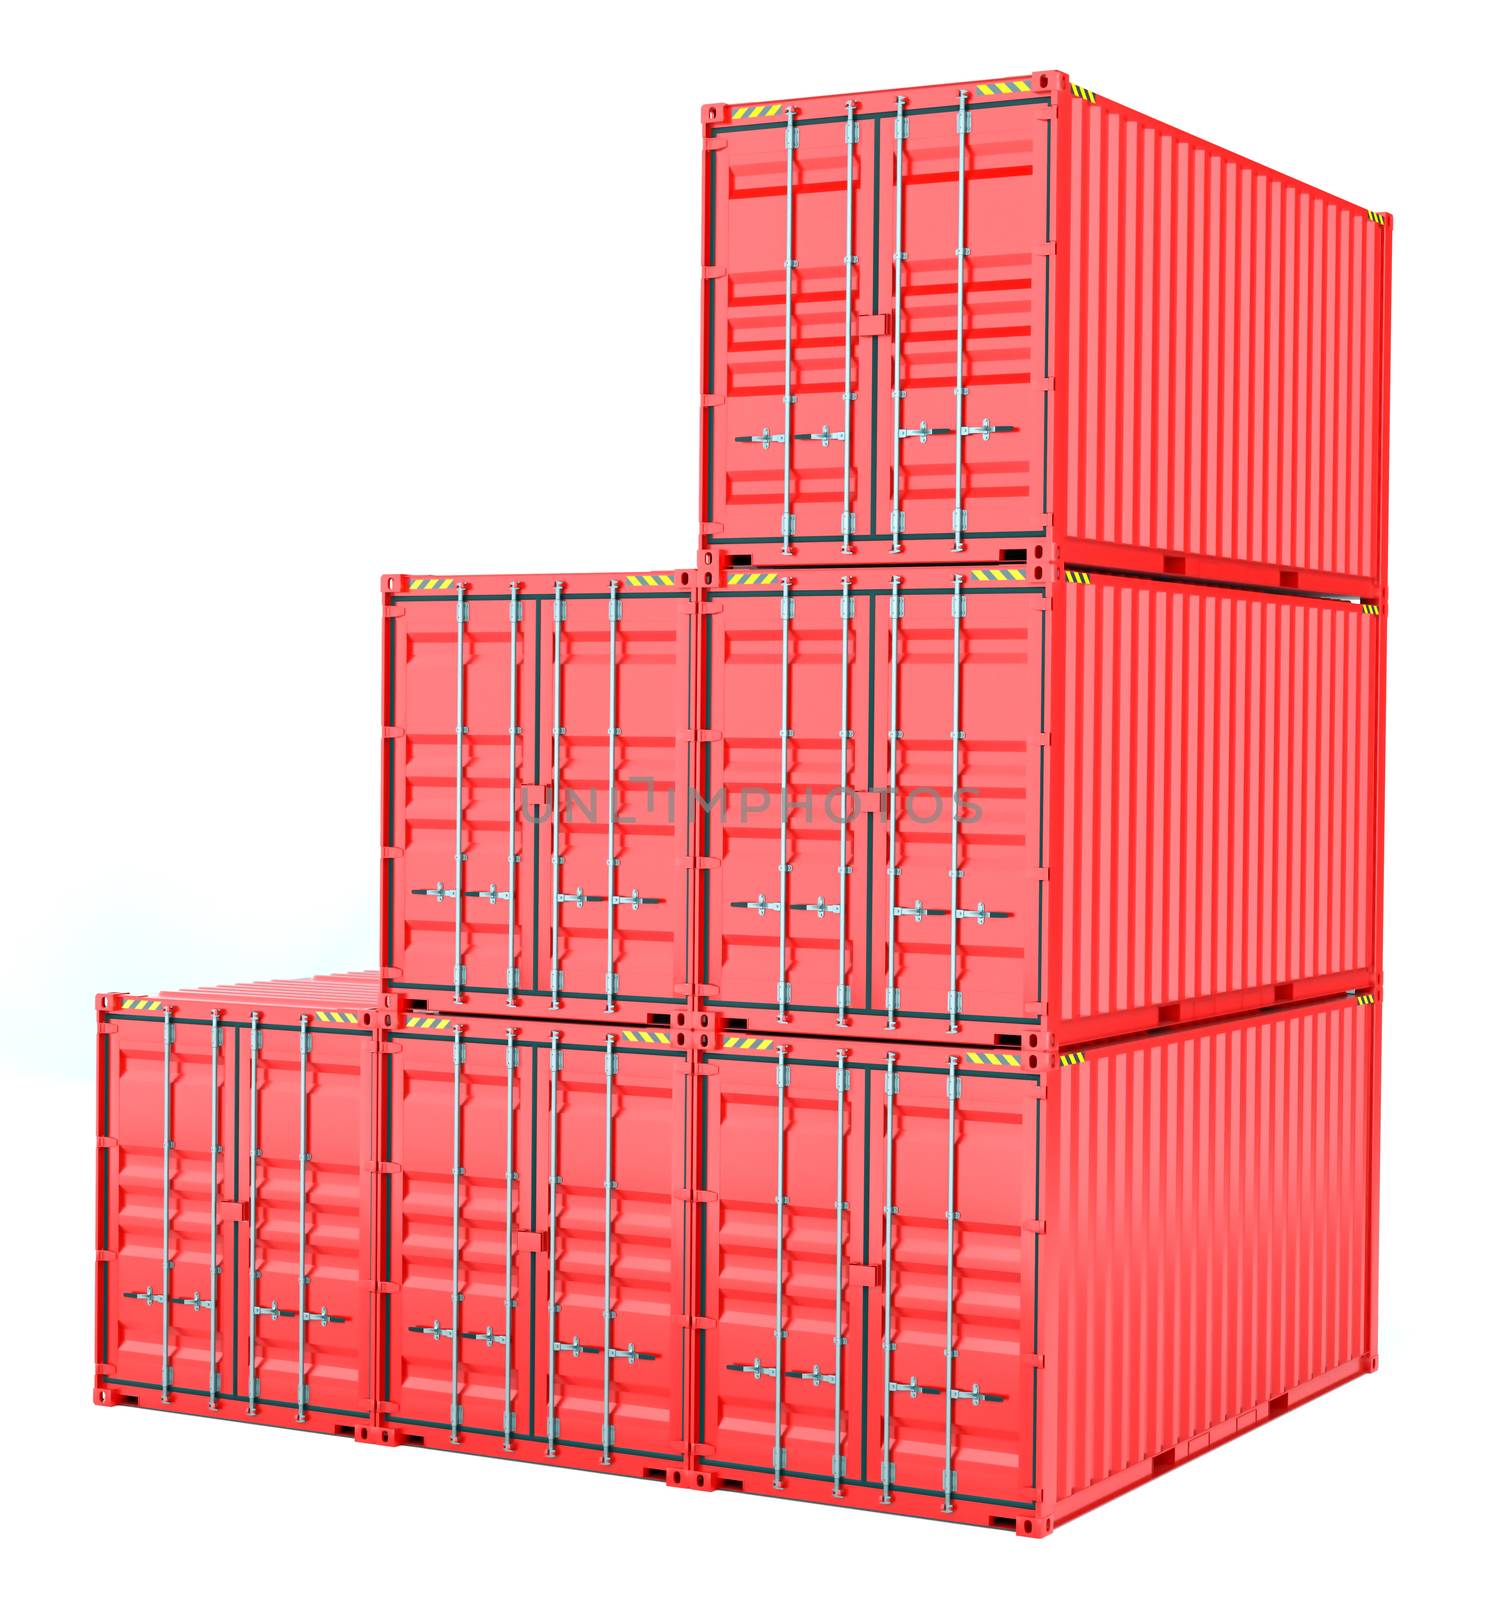 Stacked red cargo containers over white by cherezoff